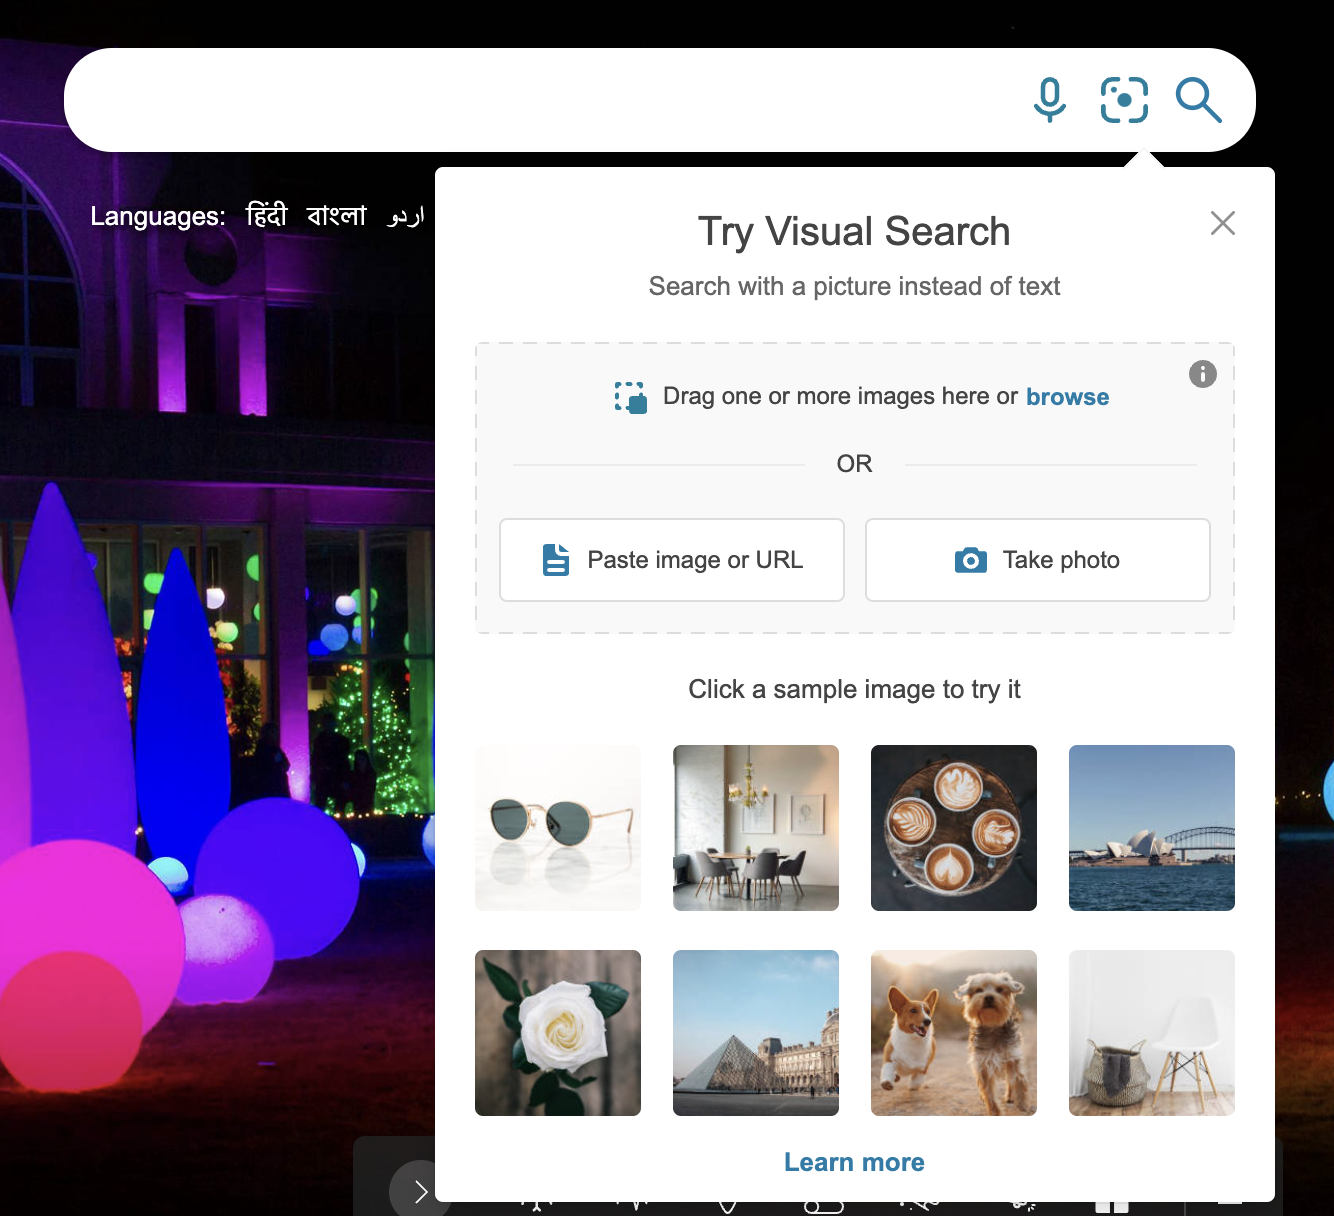 reverse image search in visual search